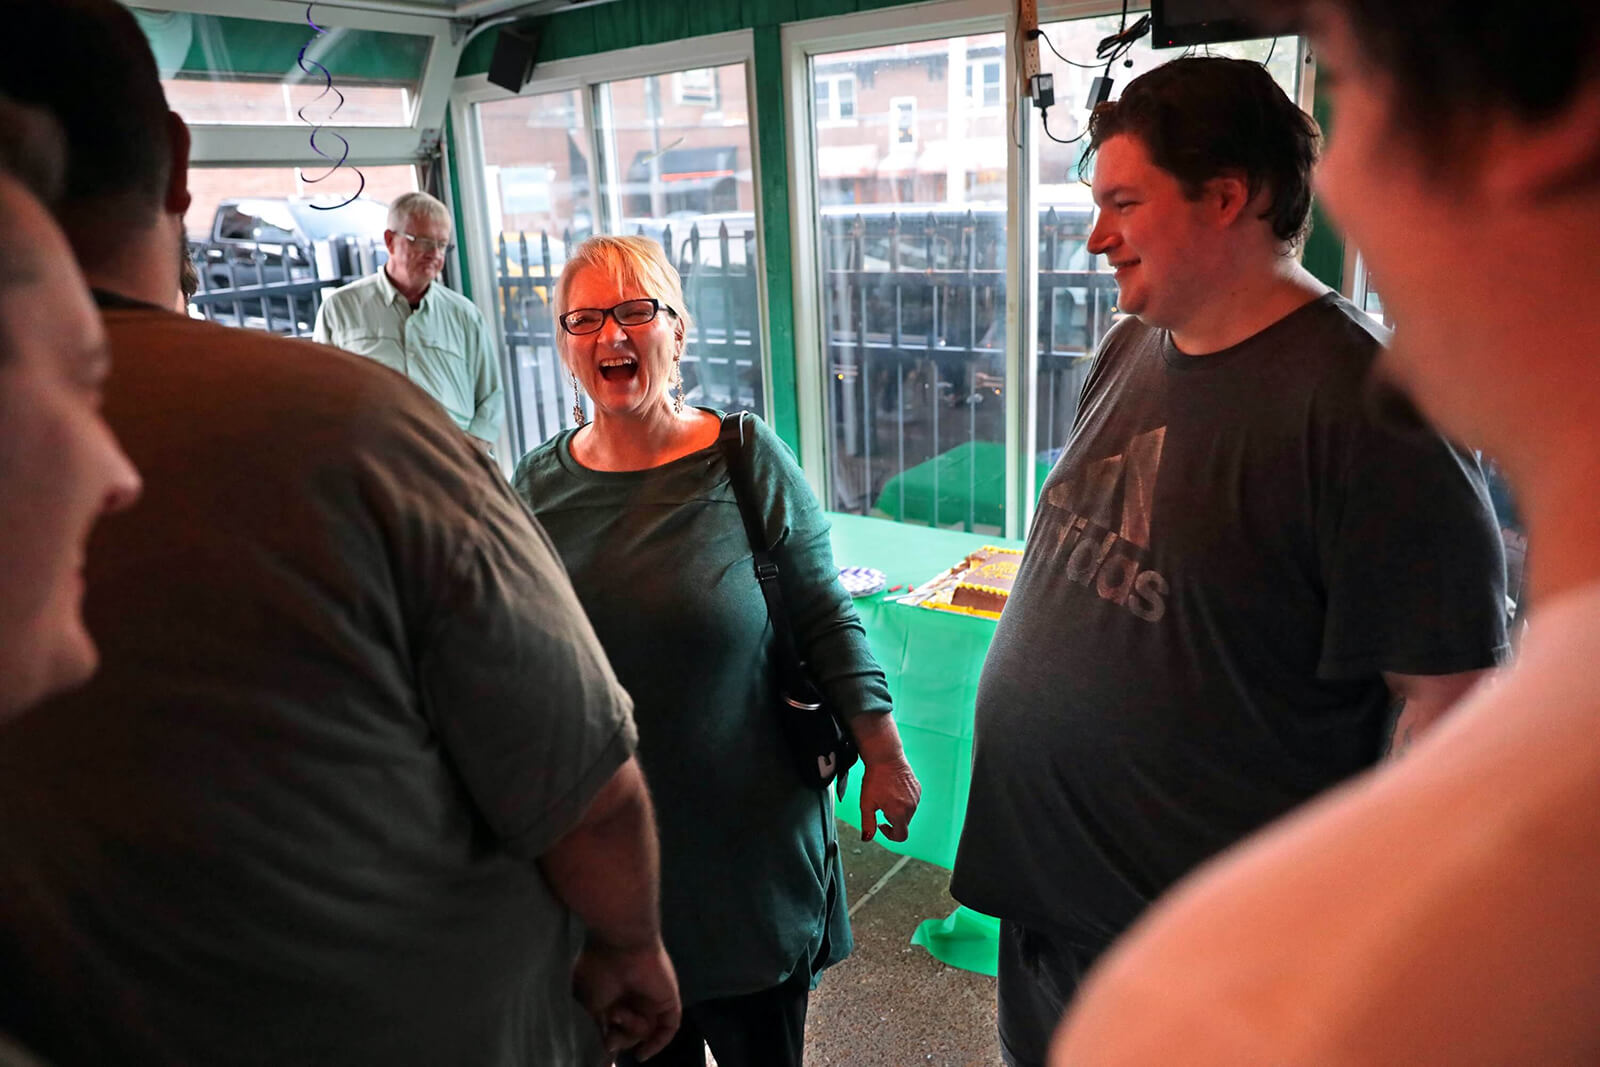 Lonni Schicker laughs next to her son, Dan Schicker, as he recounts to friends and family how he successfully pulled off a surprise birthday party at Seamus McDaniel's on Saturday, Sept. 29, 2018. He says he wanted to make it a surprise because she gets anxious when she knows a big event is coming up.